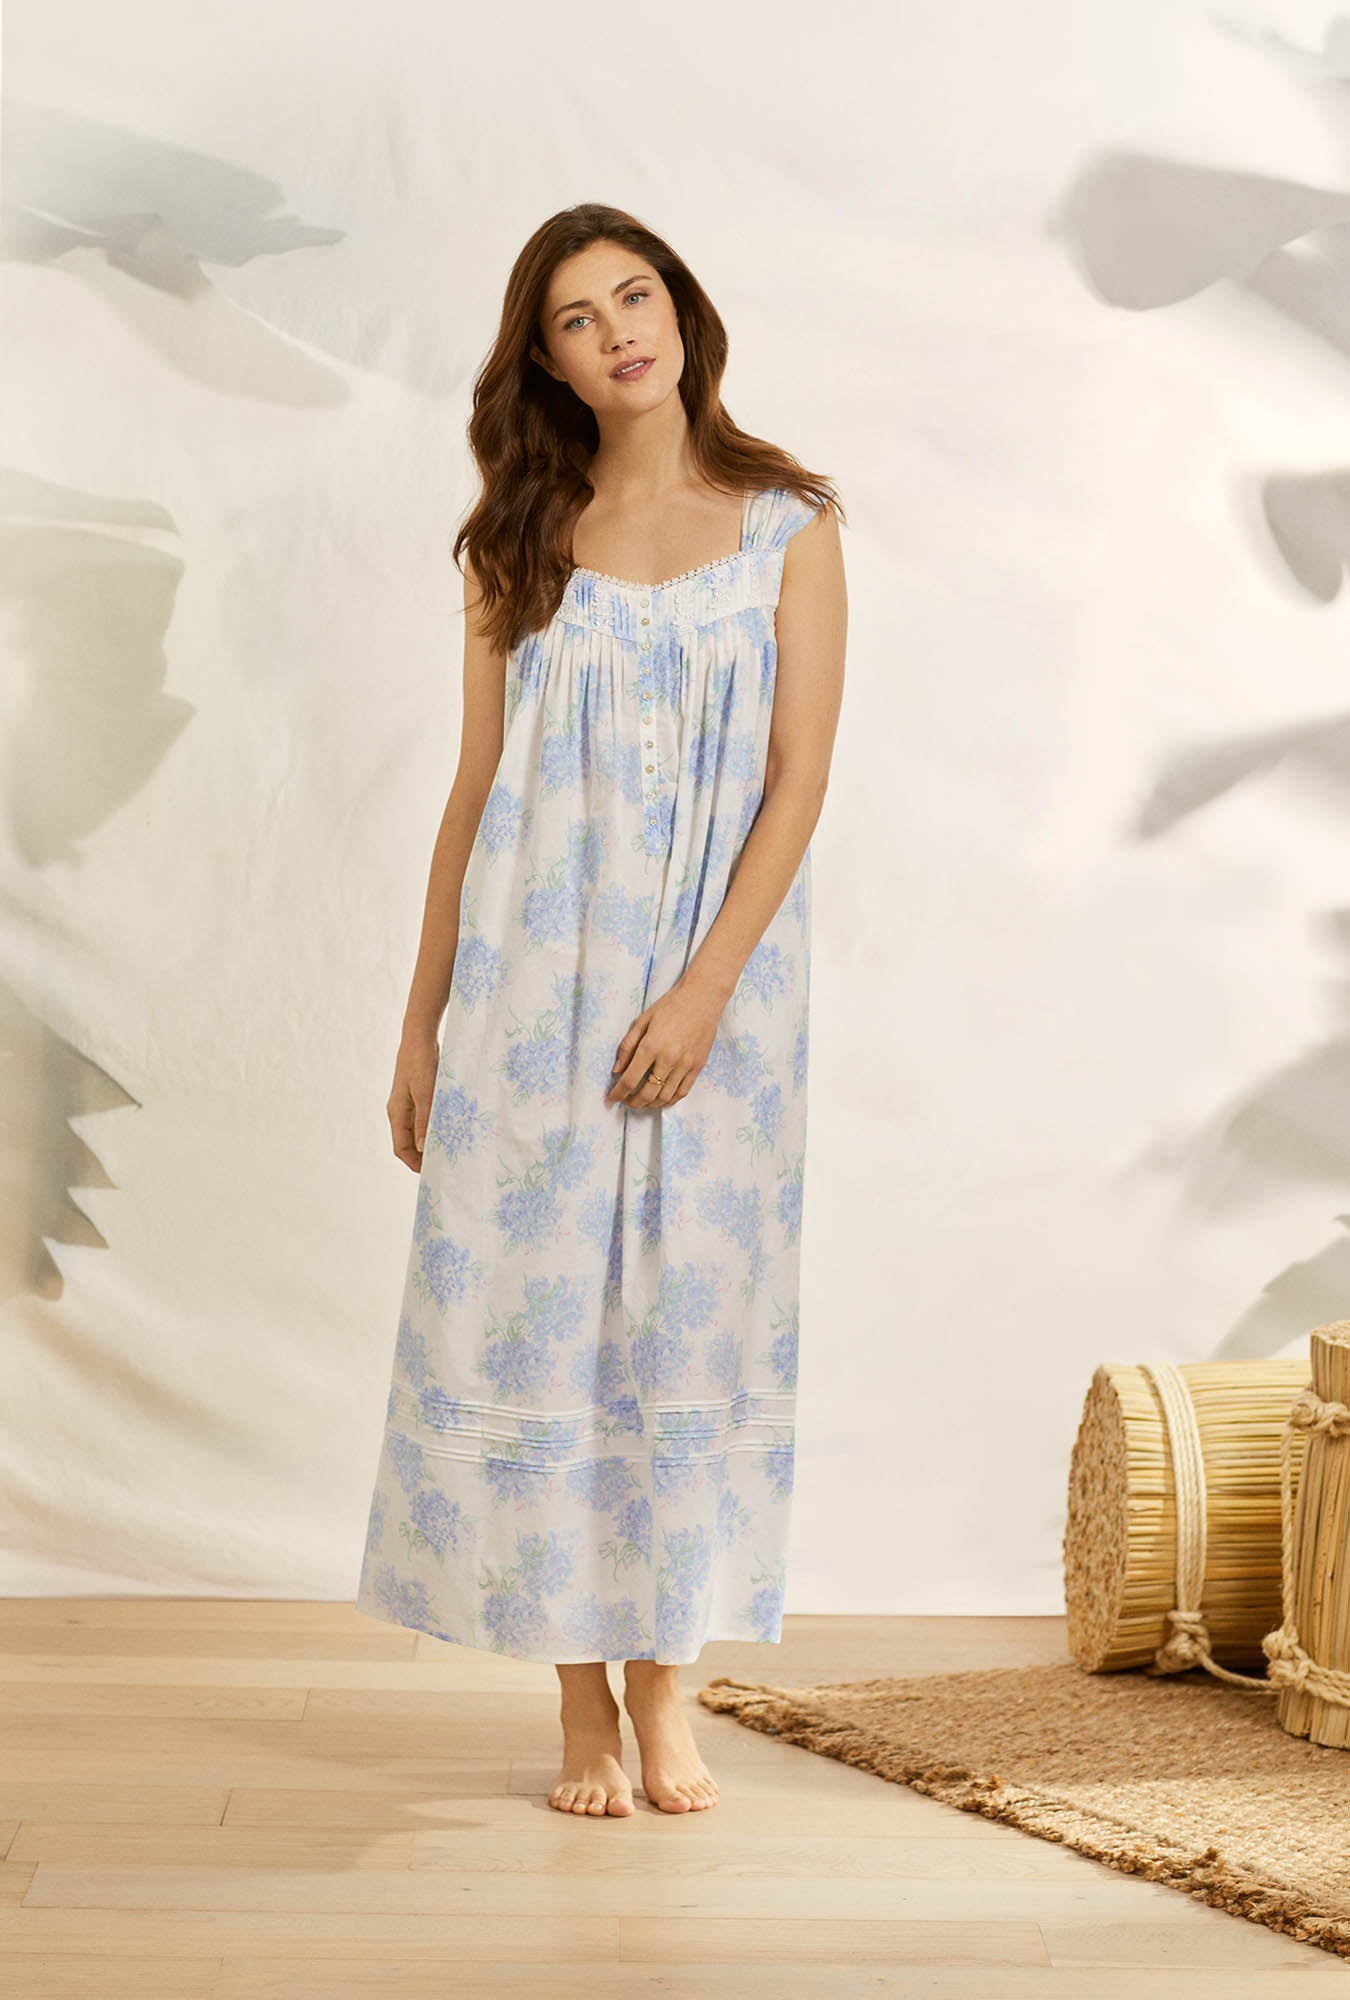 A lady wearing white sleeveless taylor  nightgown with hydrangea blossom print.